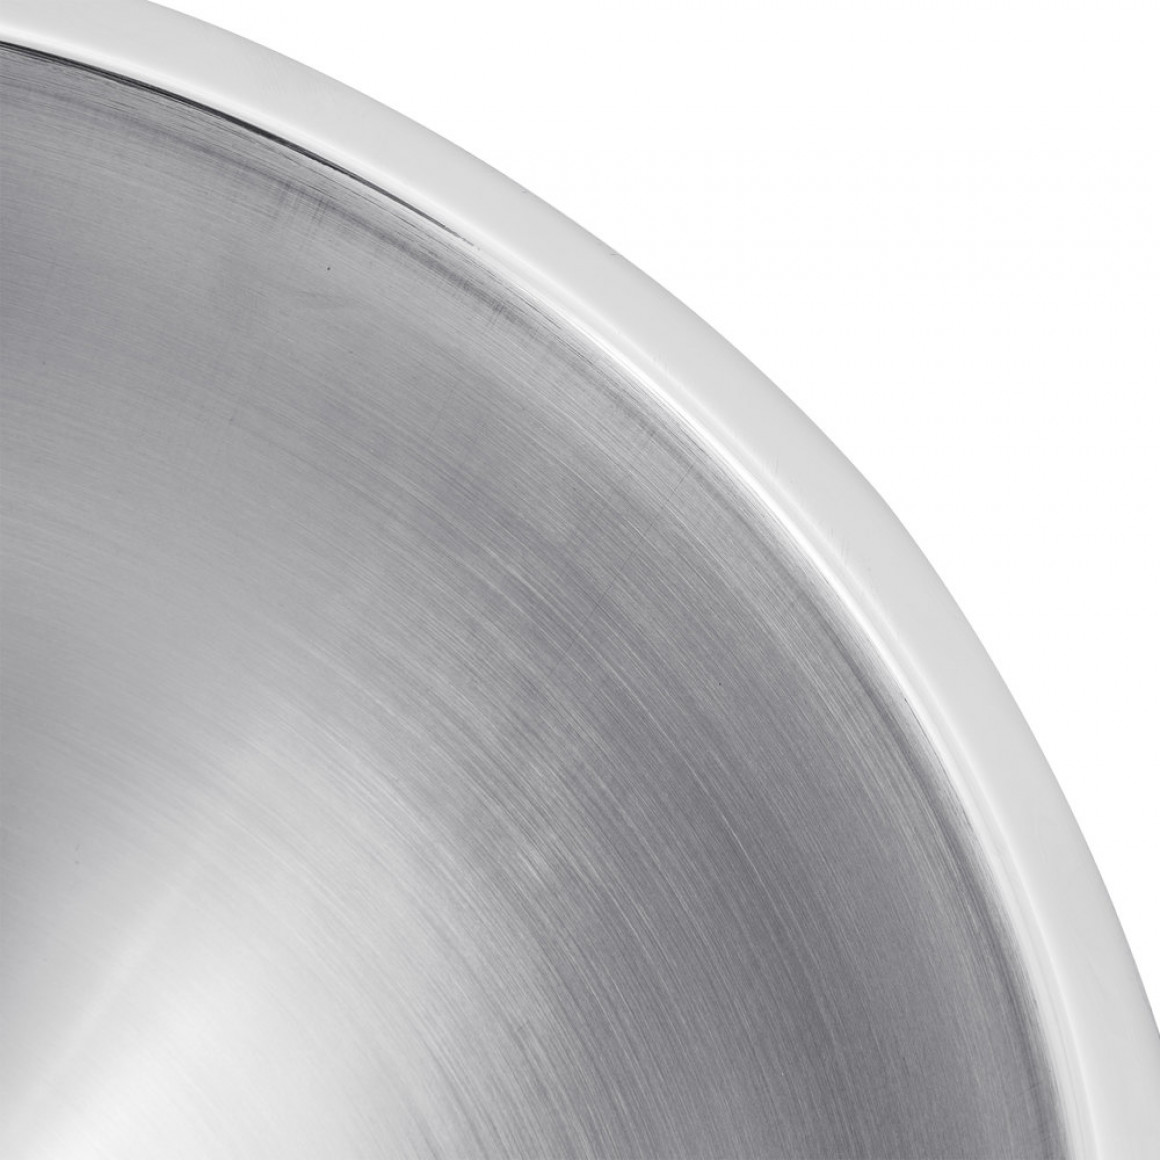 STAINLESS STEEL, SATIN BOWL, DOUBLE WALL, ANGLED, 23 OZ.